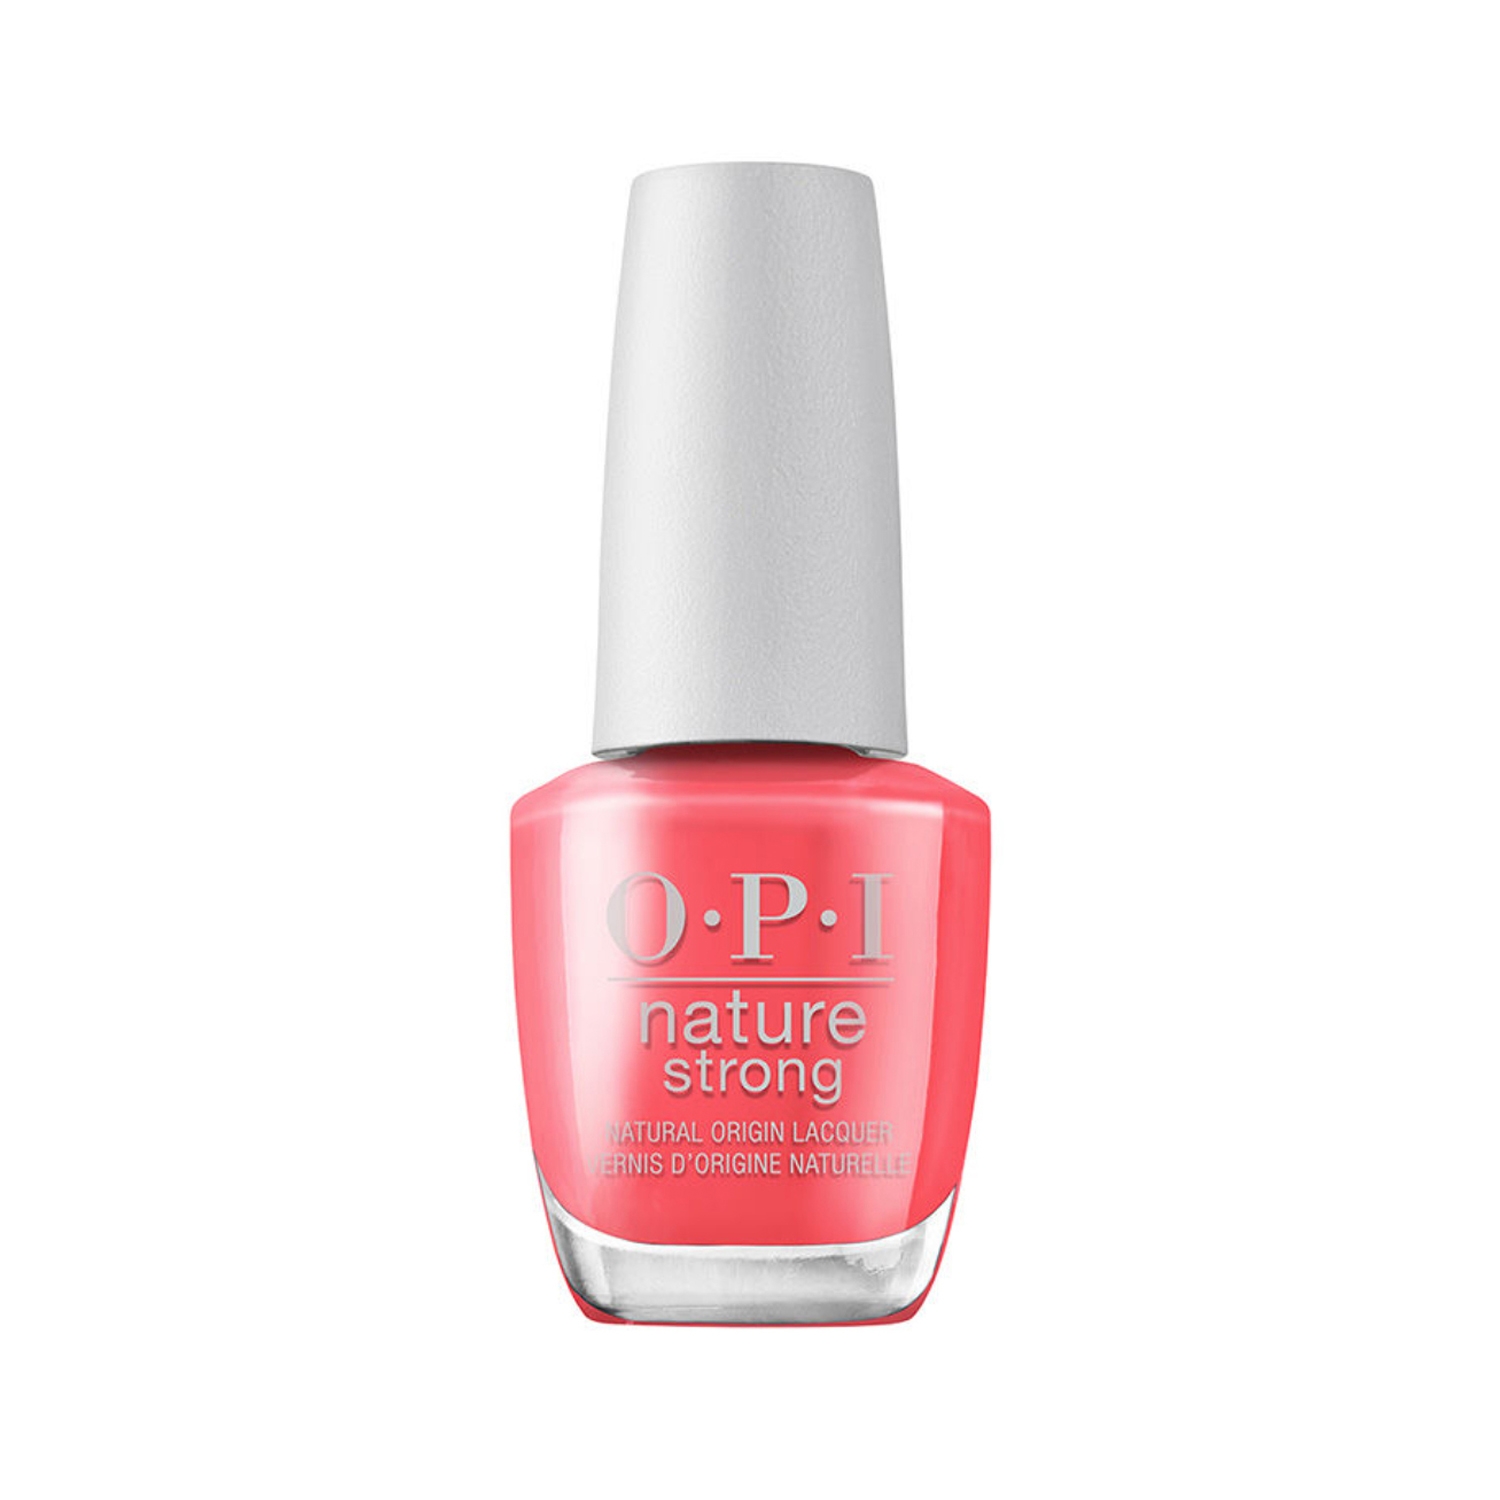 O.P.I Nature Strong Nail Paint - Once And Floral (15ml)